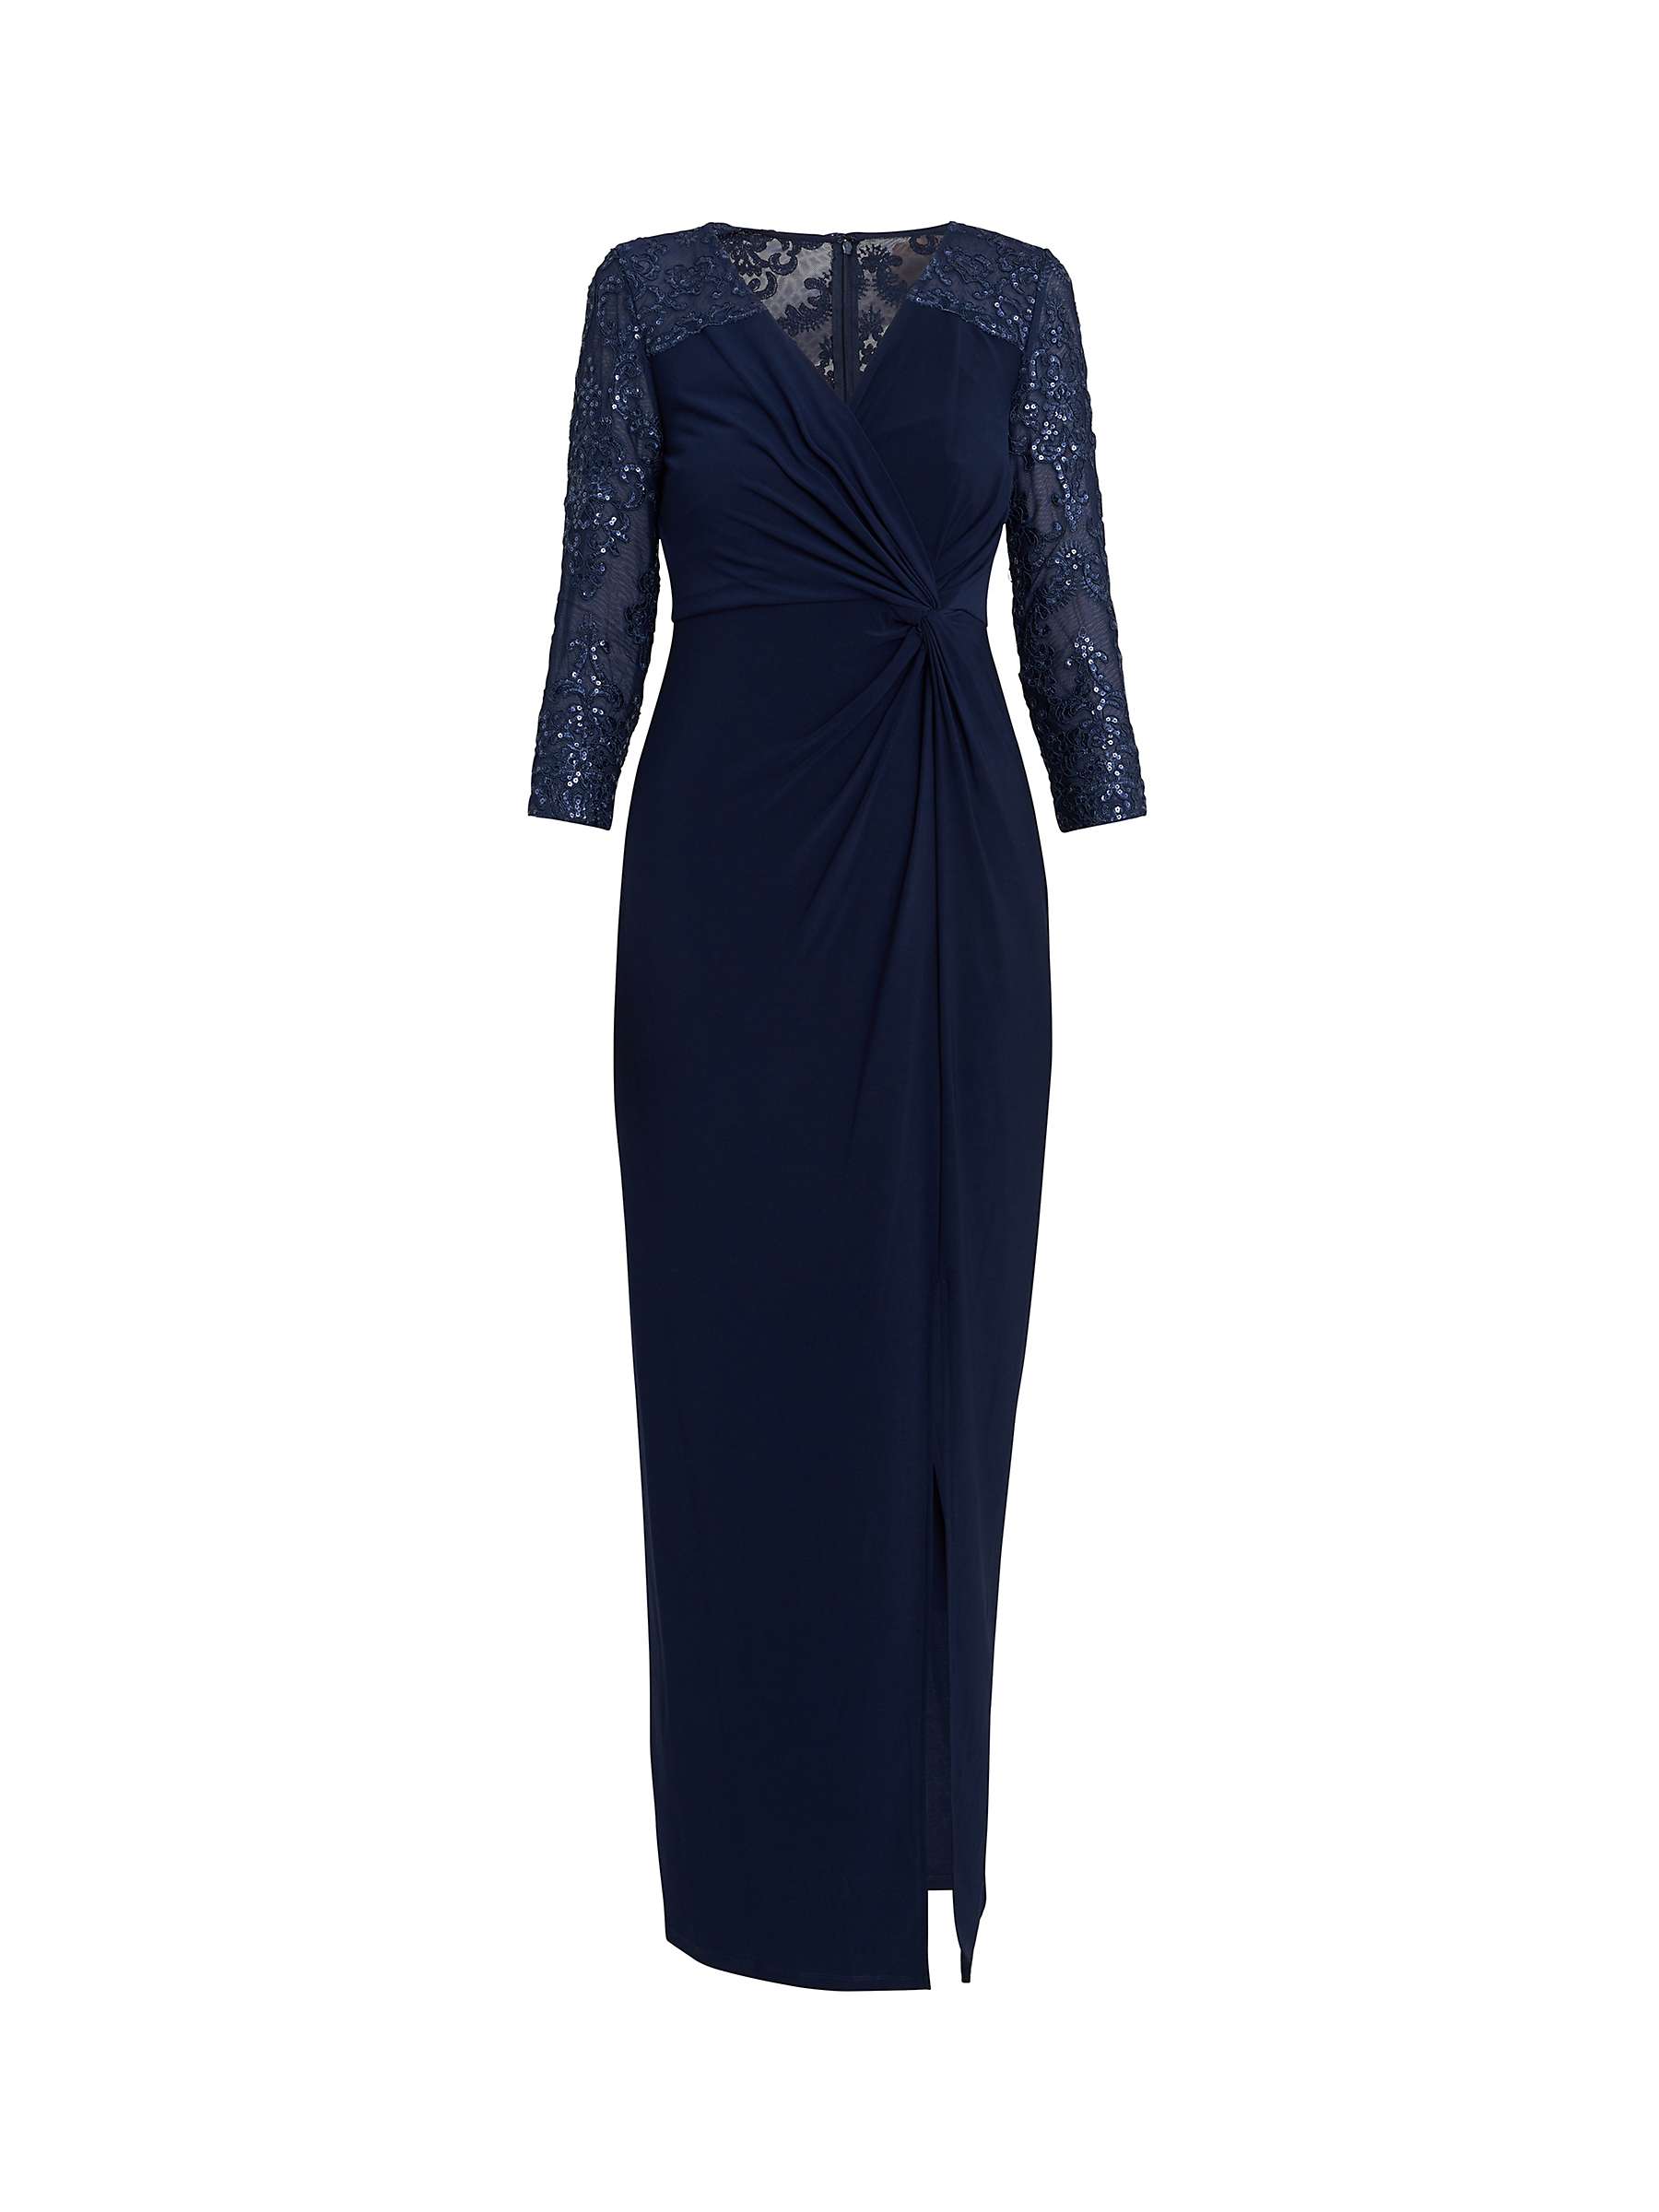 Buy Gina Bacconi Isla Maxi Dress With Twist Front, Navy Online at johnlewis.com